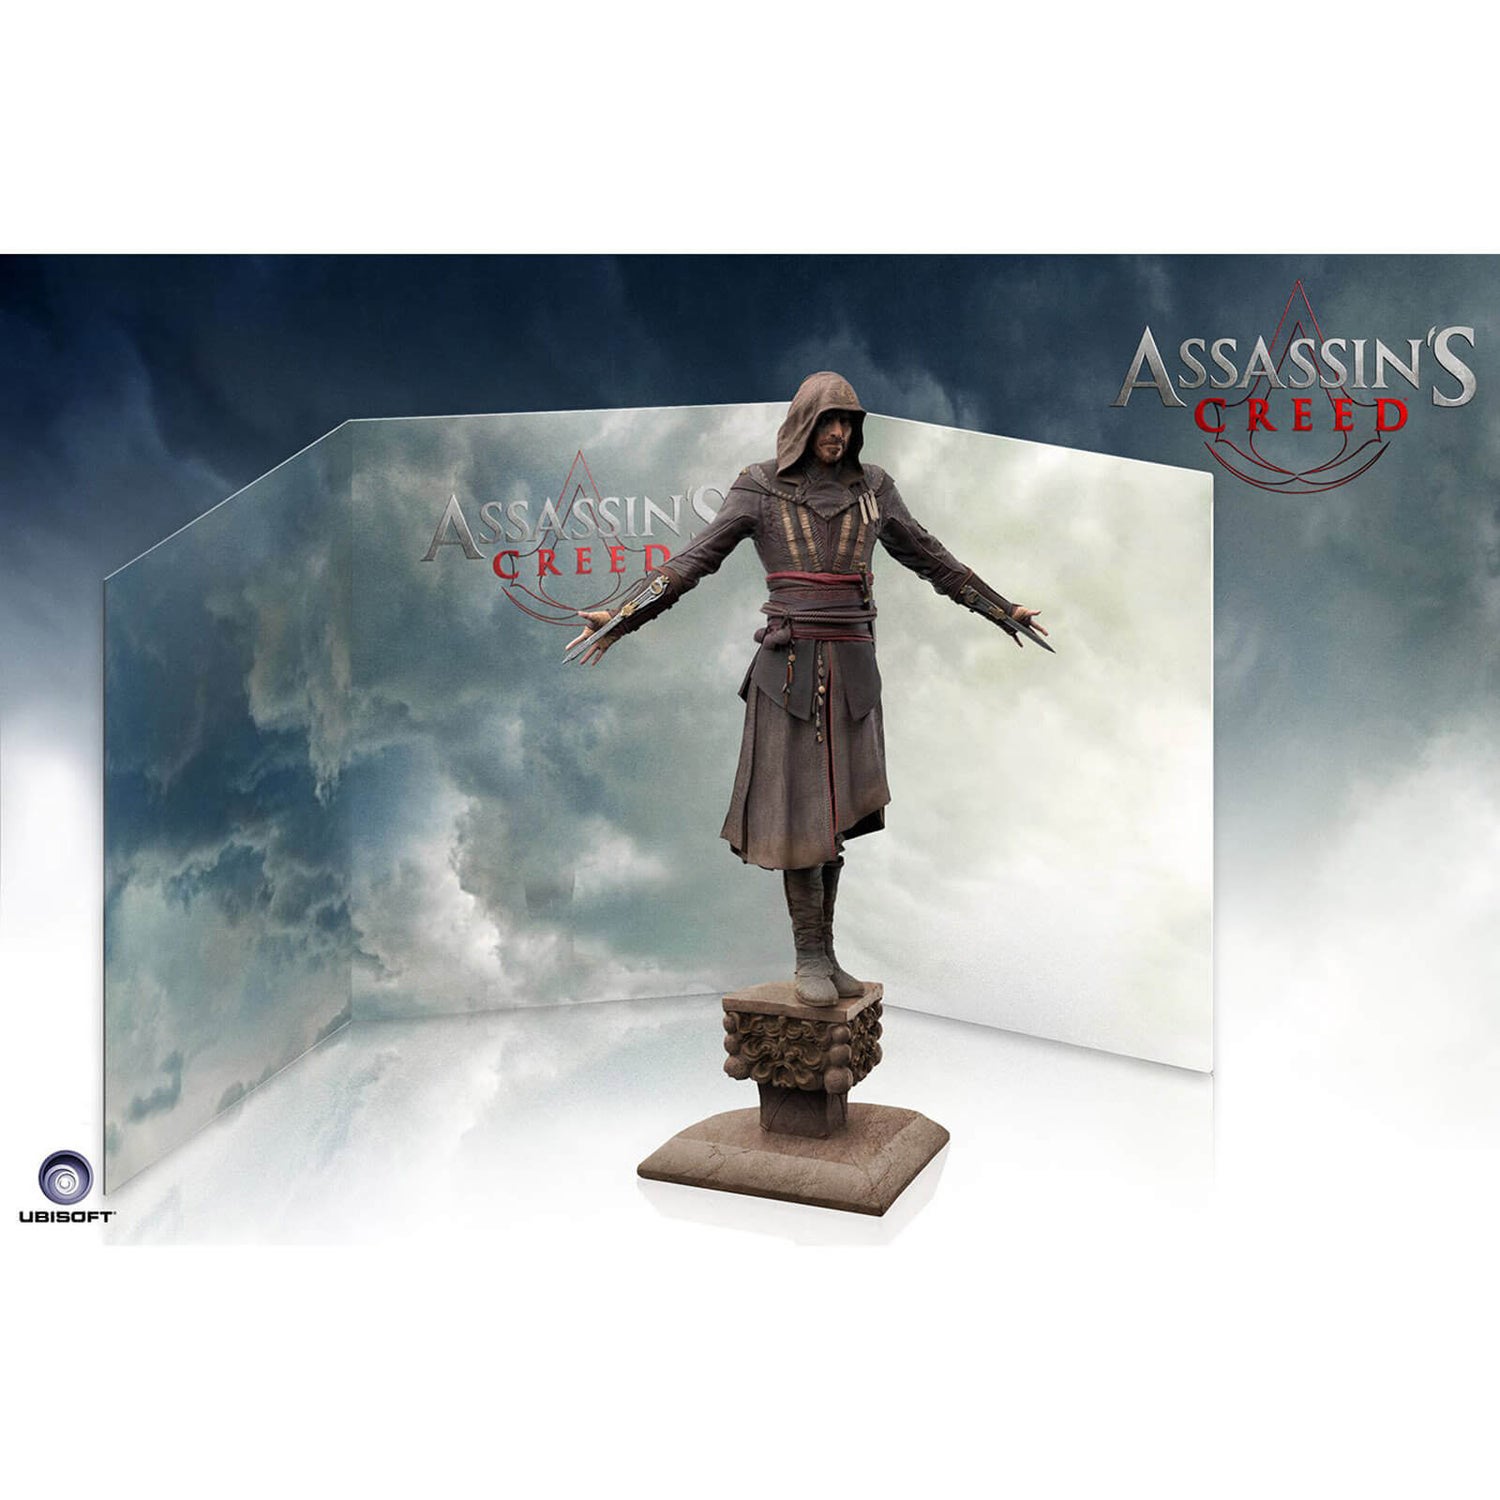 Ubisoft Unveils Stunning New Assassin's Creed Statues